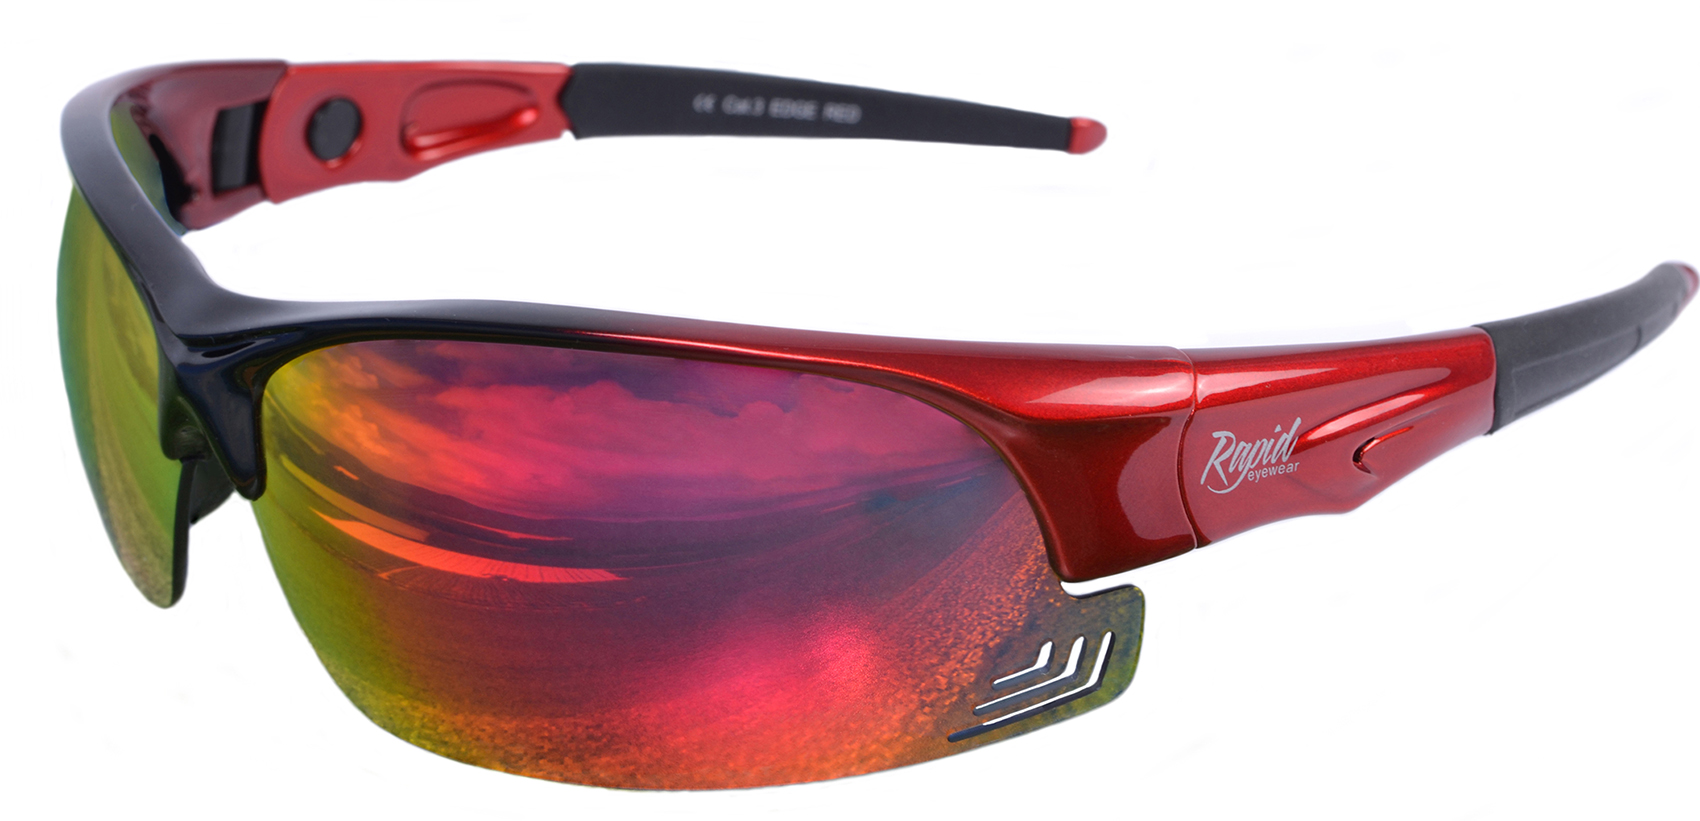 Red sunglasses for sports mirrored lenses